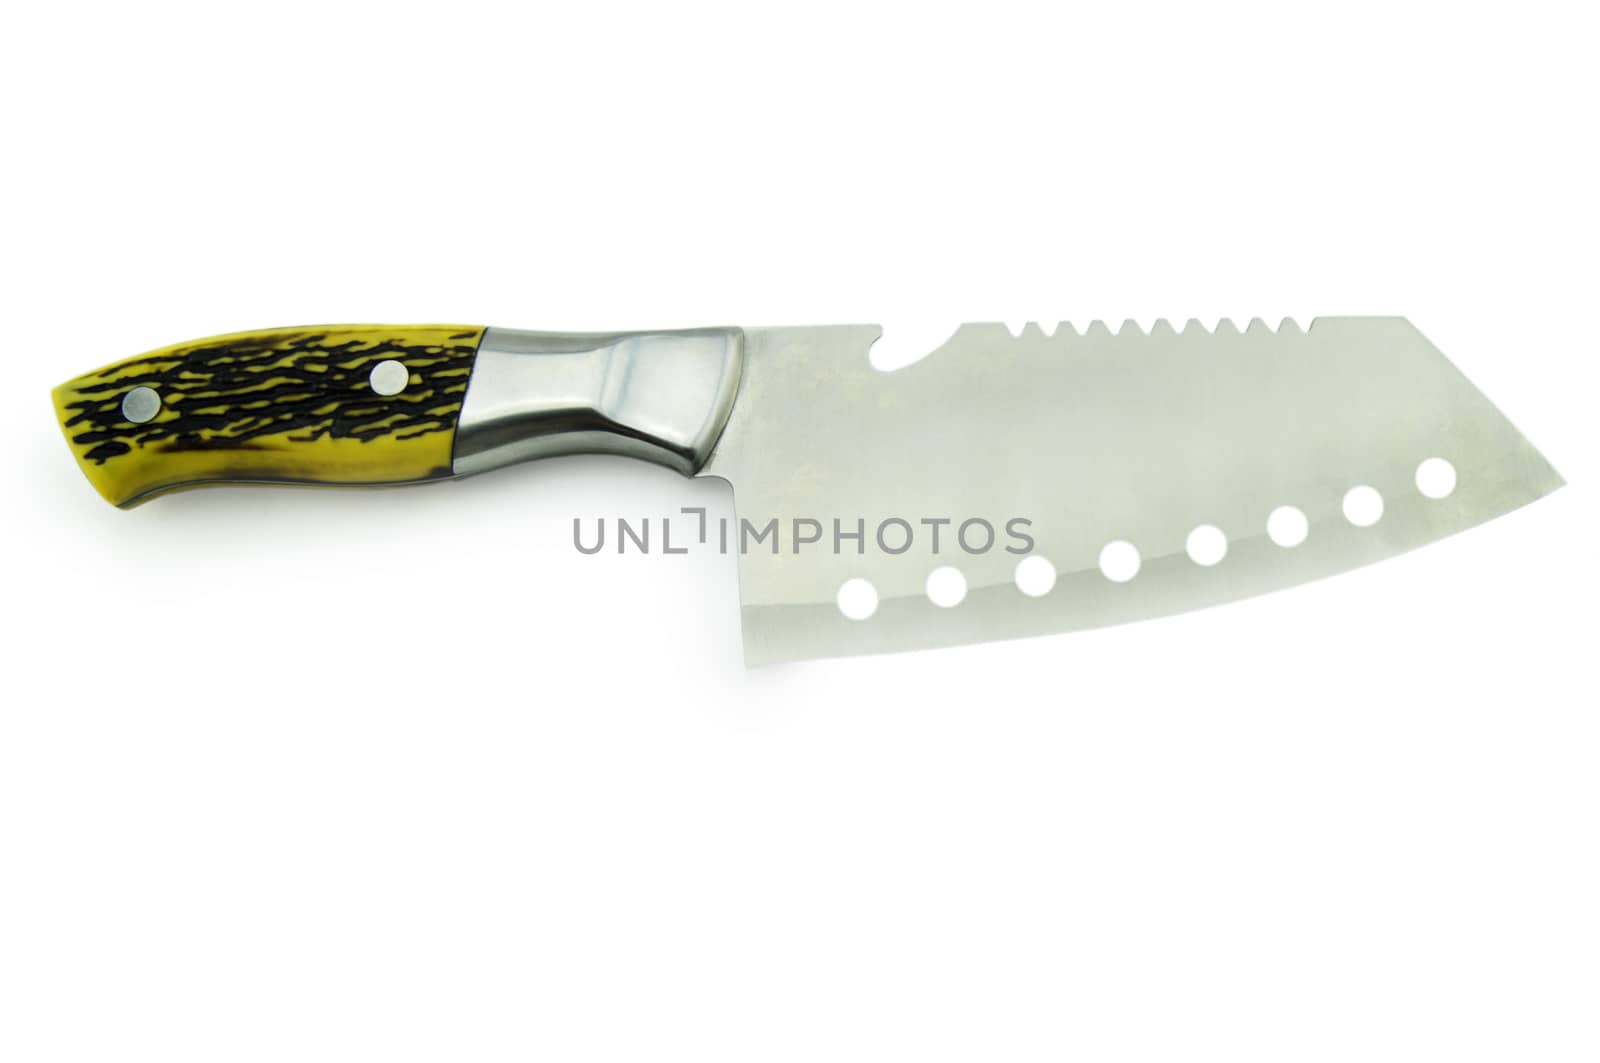 Meat cleaver knife isolated on white background. For your commercial and editorial use